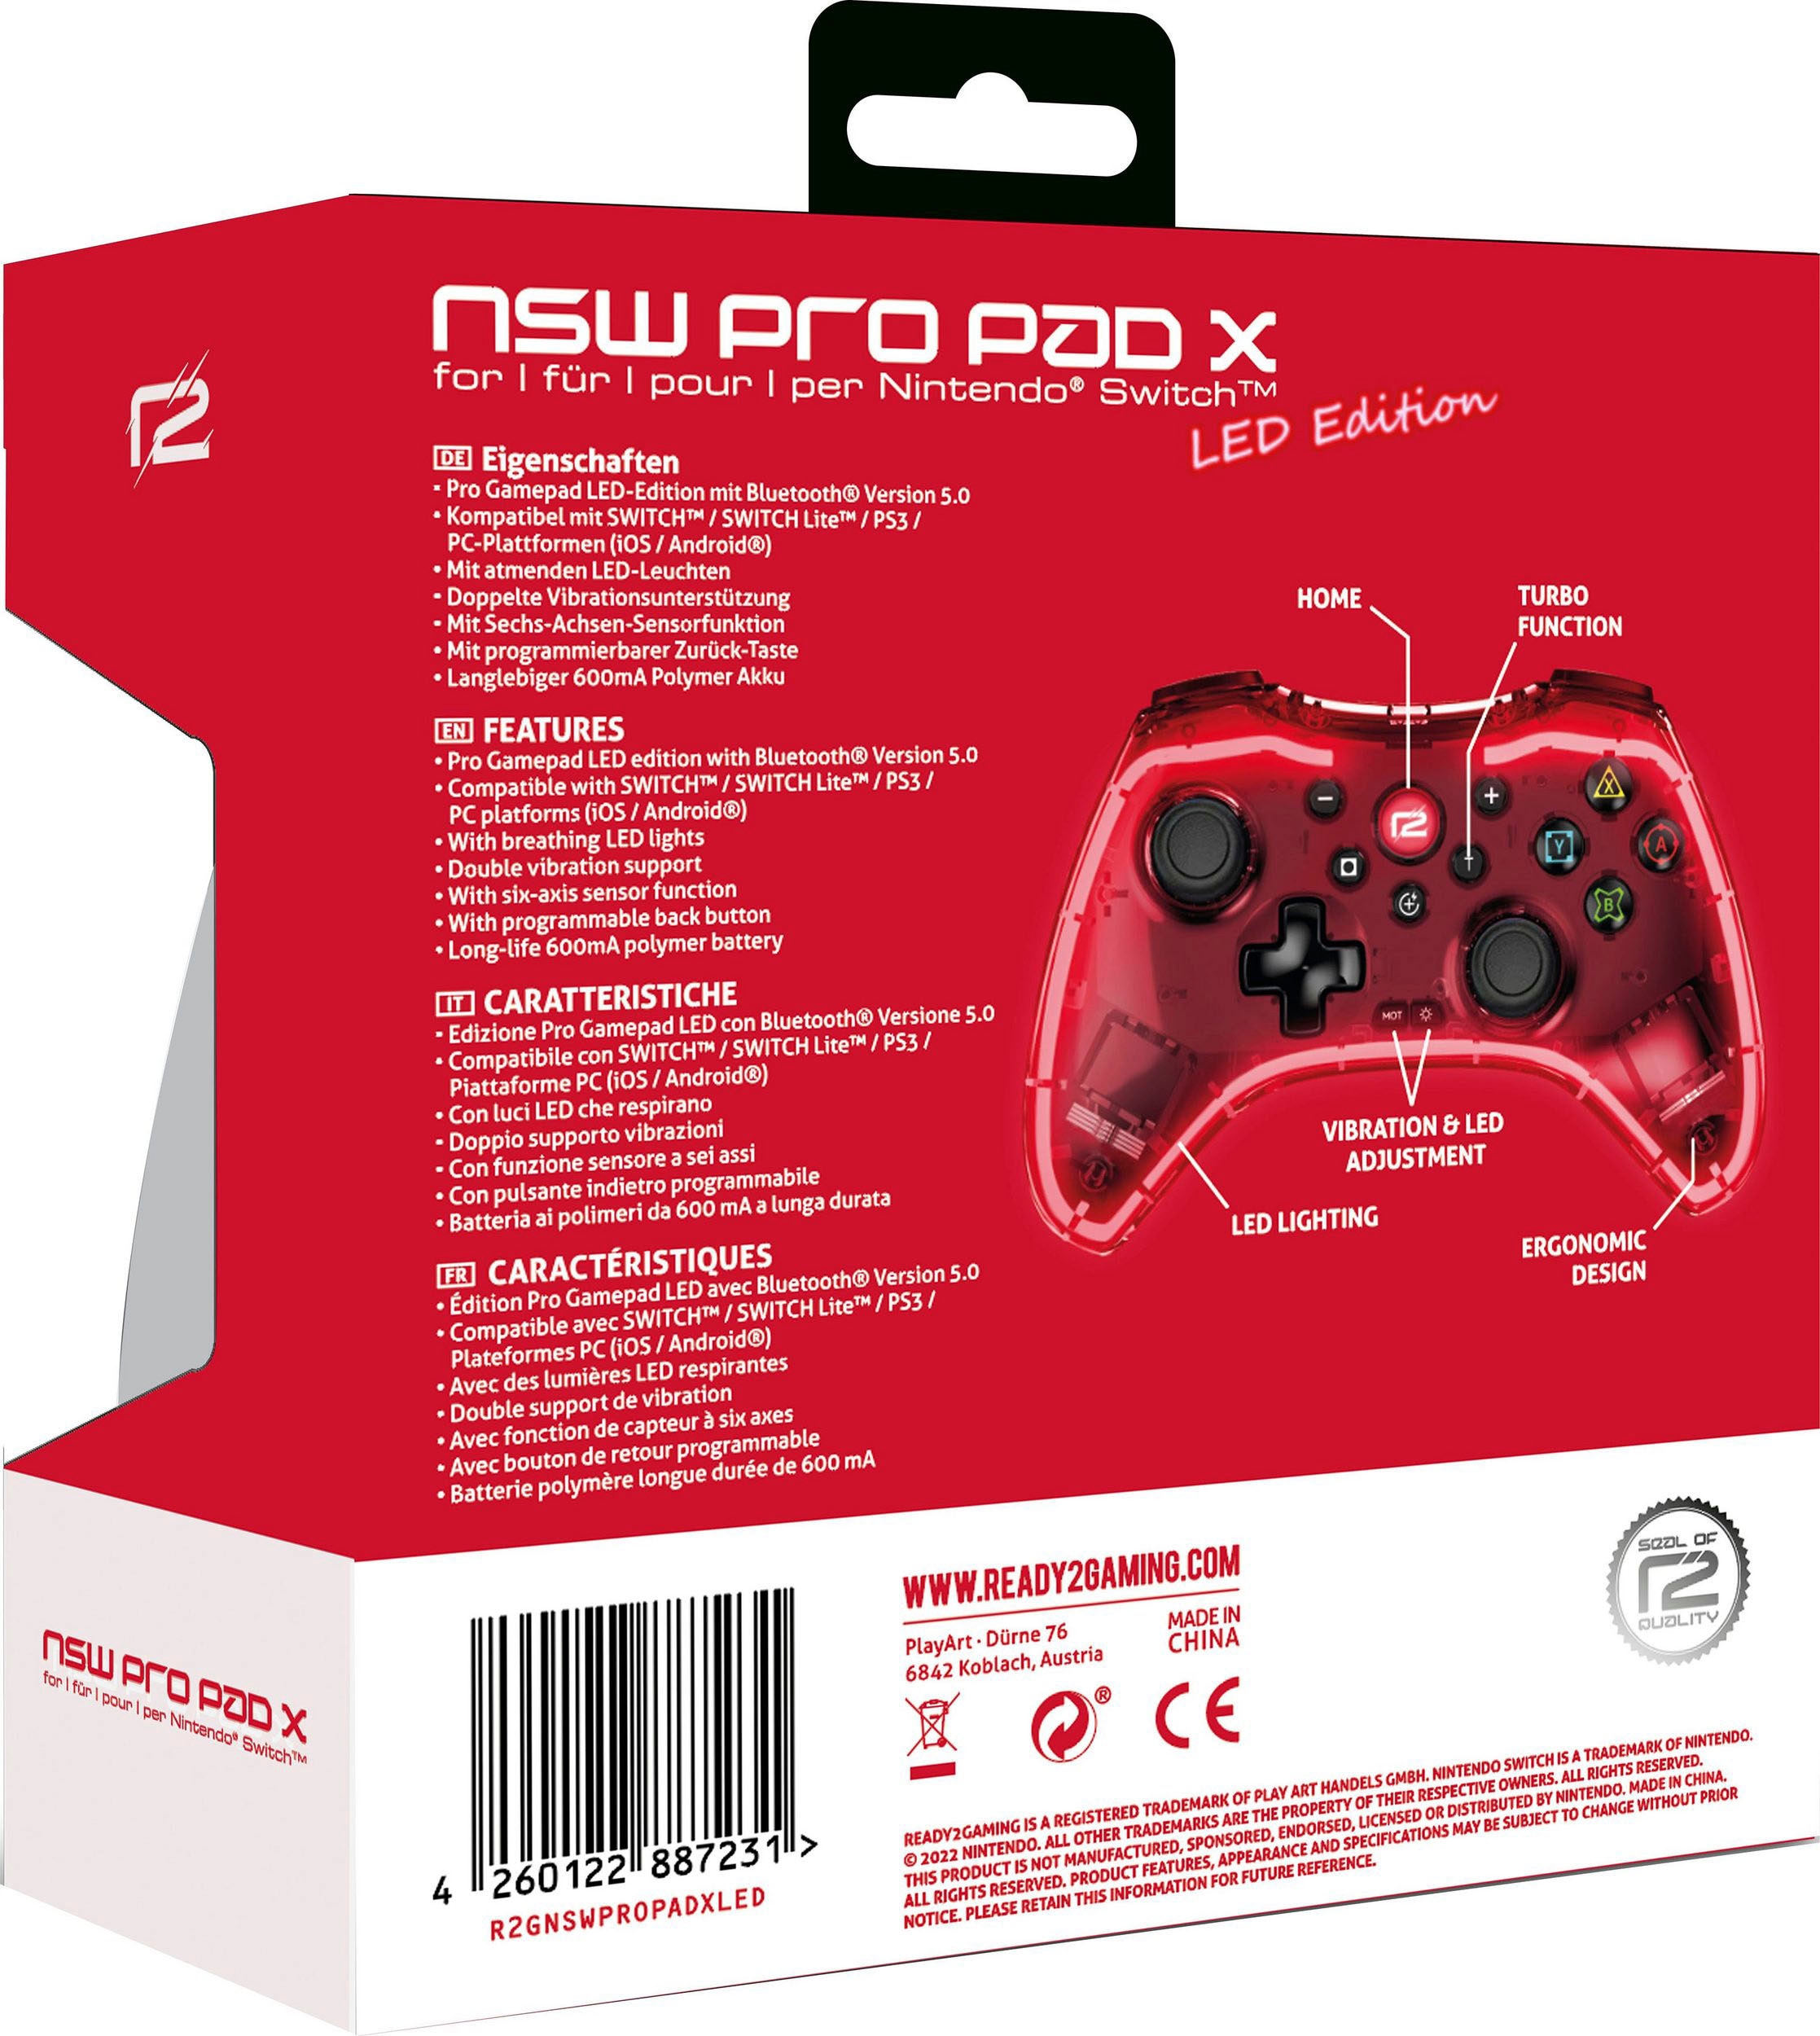 Ready2gaming Controller »Gamepad + NSW Lego 2K Drive (USK) - Code in the Box«